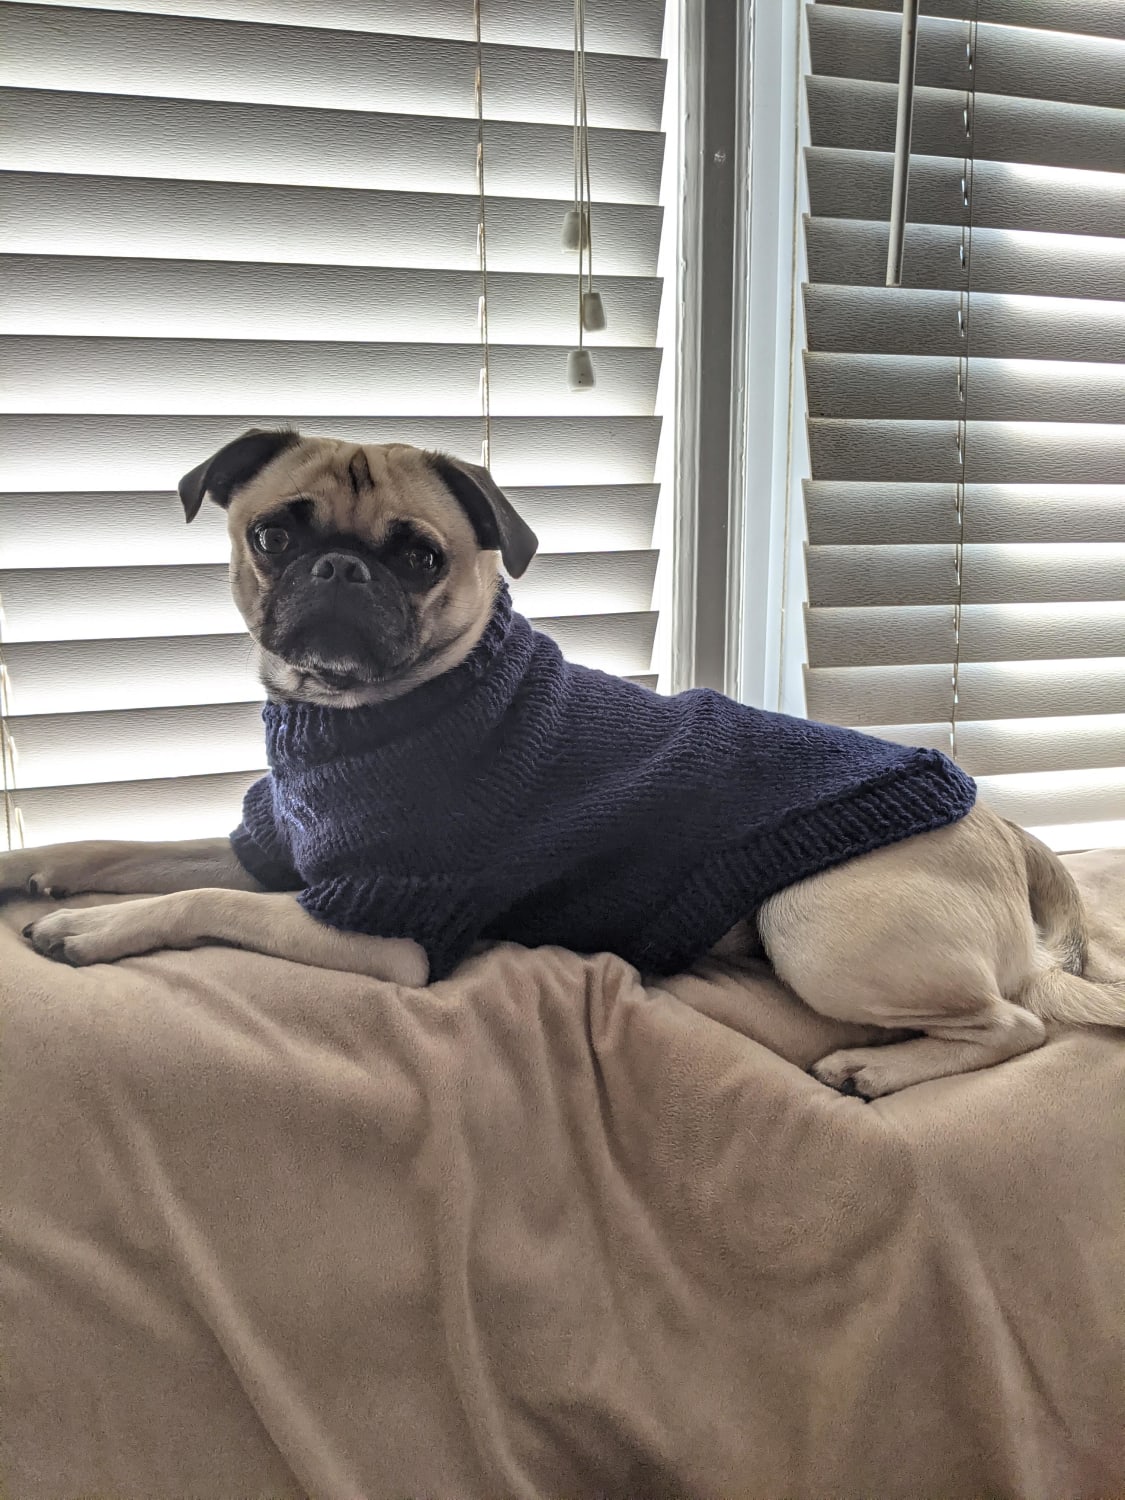 My first "big" project completed - a second attempt on a sweater for my pug Winston!